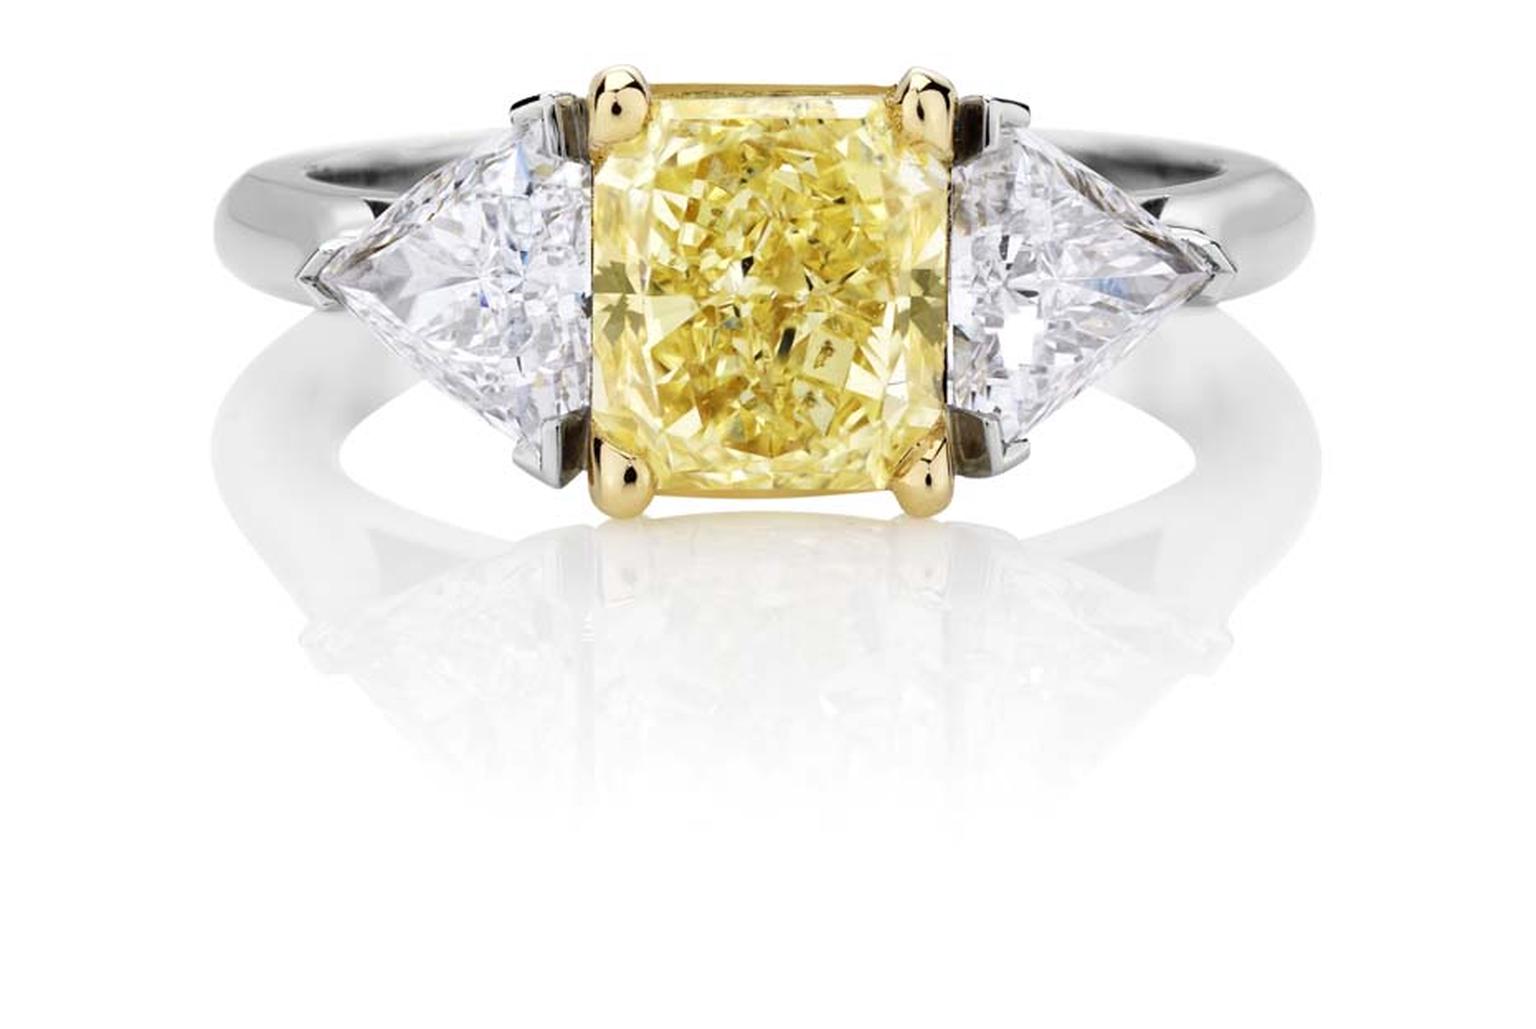 Part of De Beers jewellery’s 1888 Master Diamonds collection, a three stone engagement ring set with a 3.93ct vivid yellow diamond flanked by trilliant-cut diamonds.